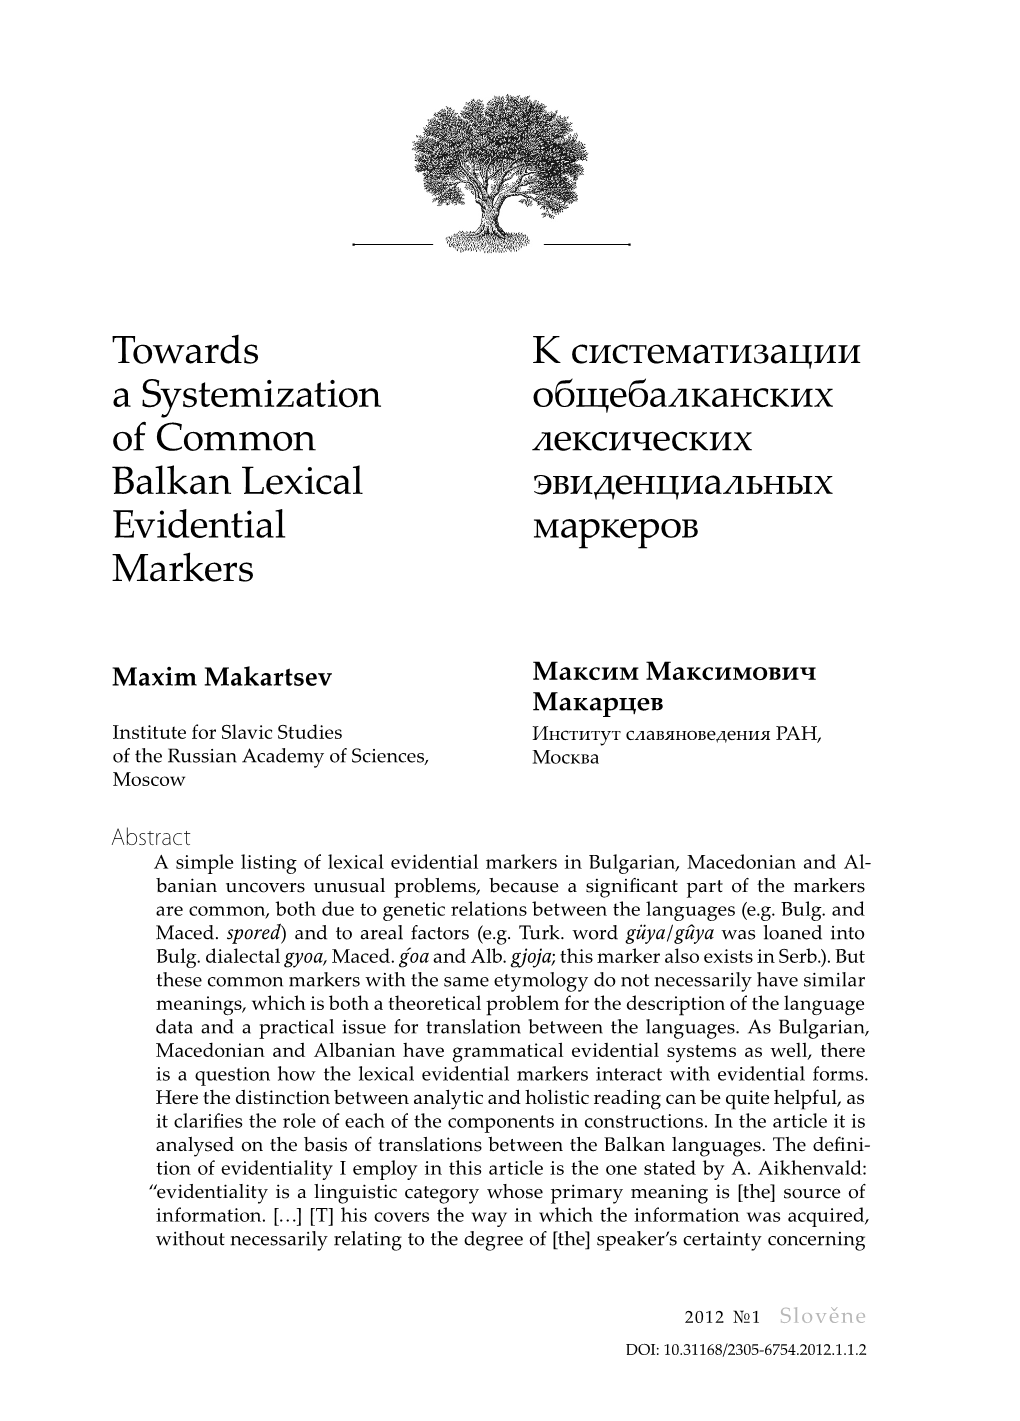 Slověne. Vol. 1. No. 1. Towards a Systemization of Common Balkan Lexical Evidential Markers